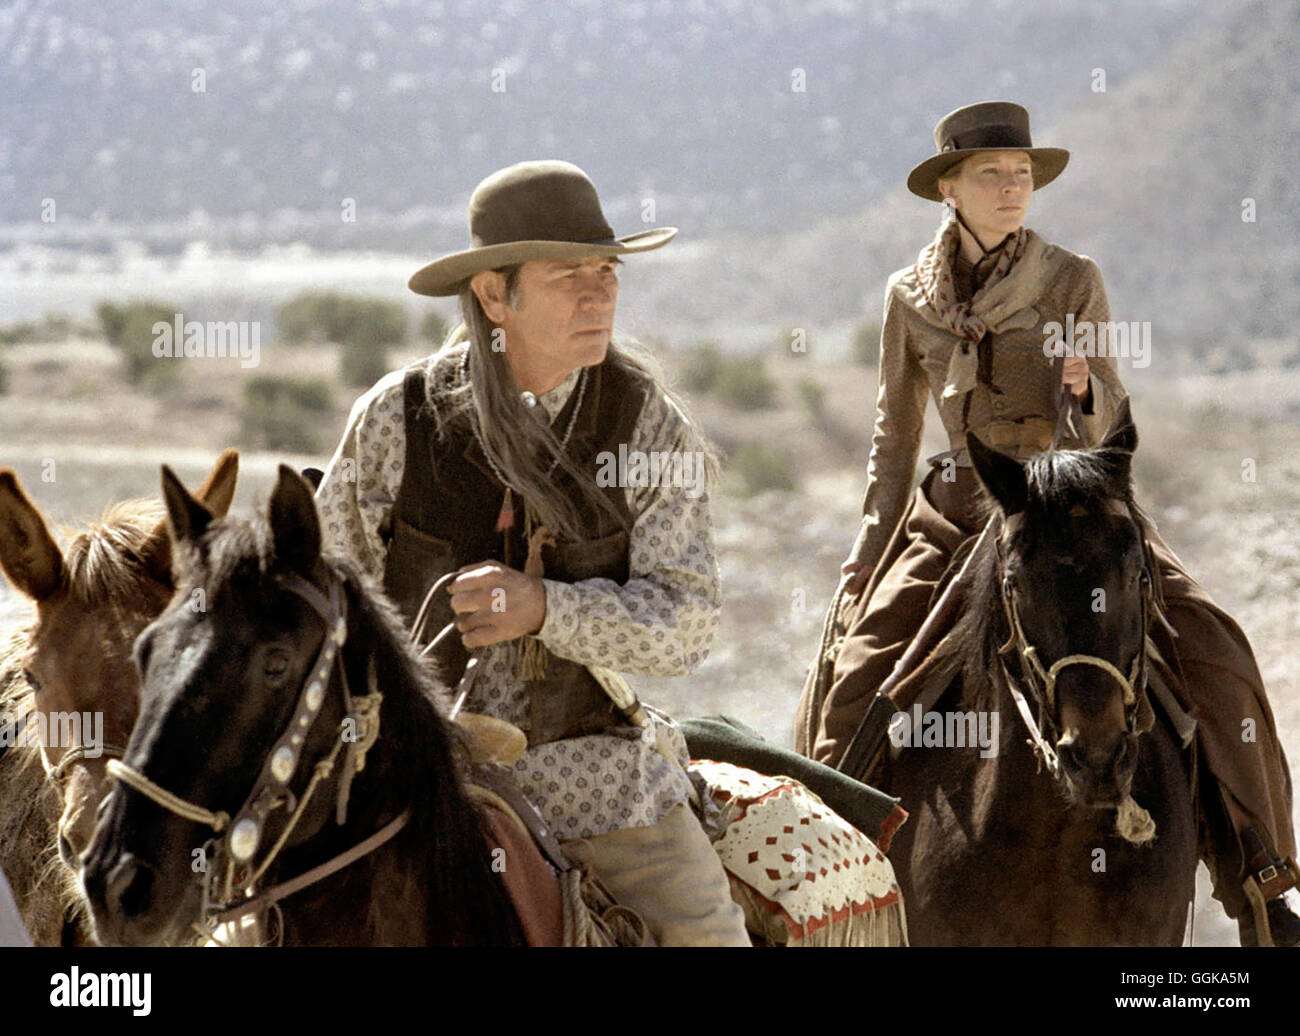 THE MISSING / The Missing USA 2003 / Ron Howard Samuel Jones (TOMMY LEE  JONES) und Maggie Gilkeson (CATE BLANCHETT) Regie: Ron Howard aka. The  Missing Stock Photo - Alamy